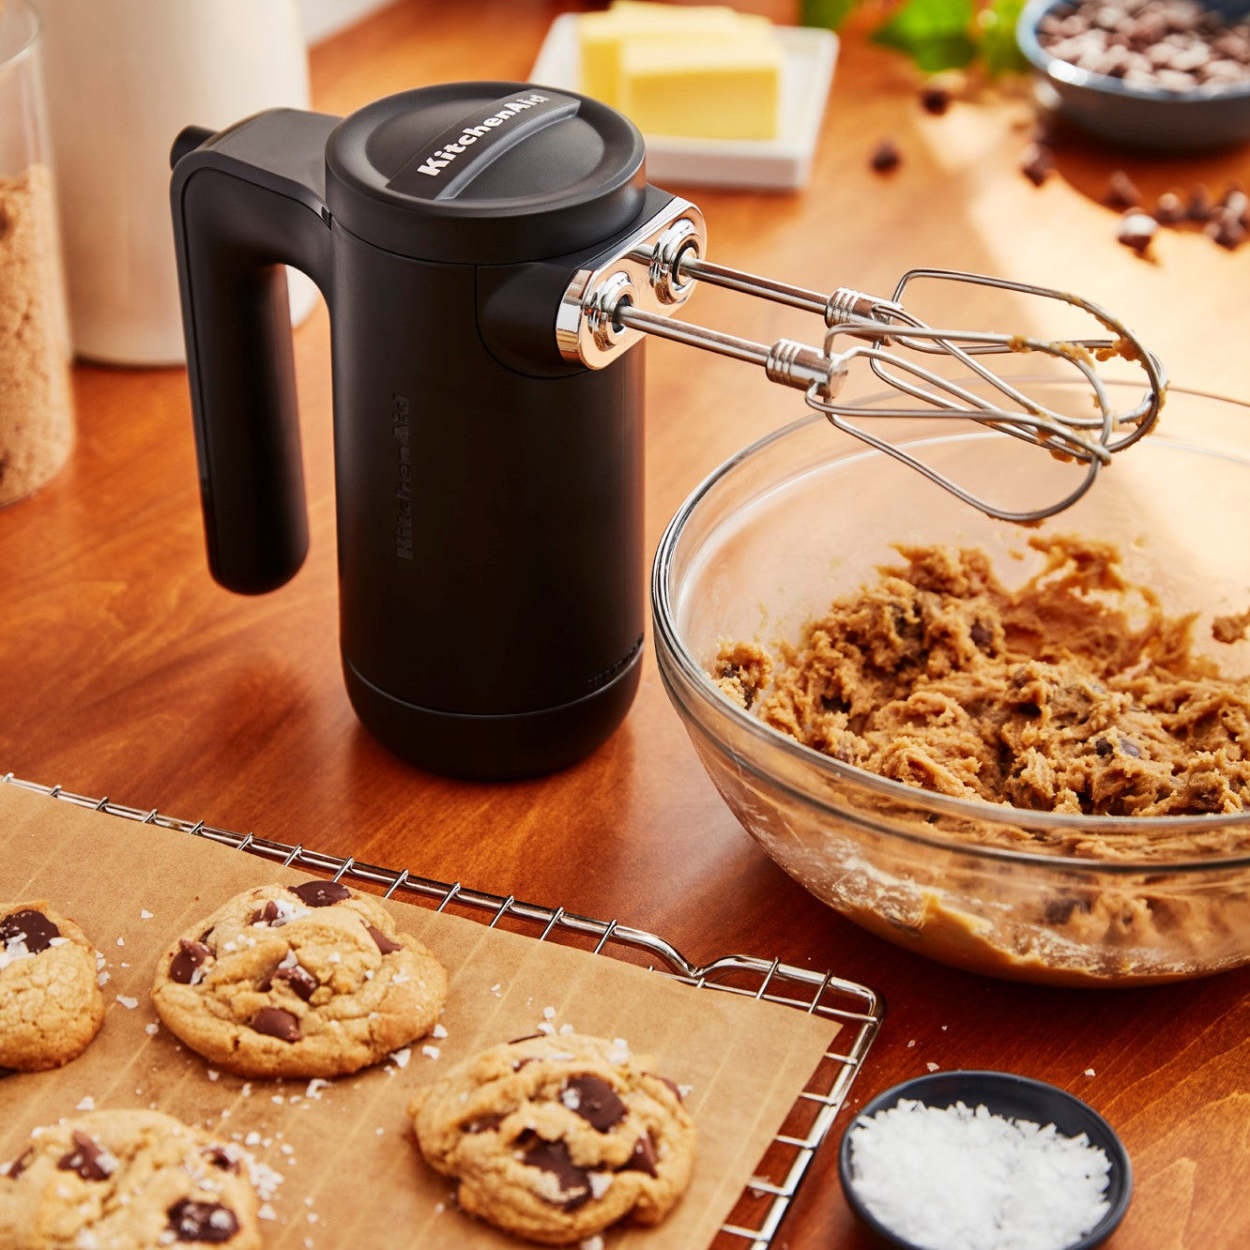 KitchenAid Go Cordless Hand Blender Battery Included - Hearth & Hand with Magnolia